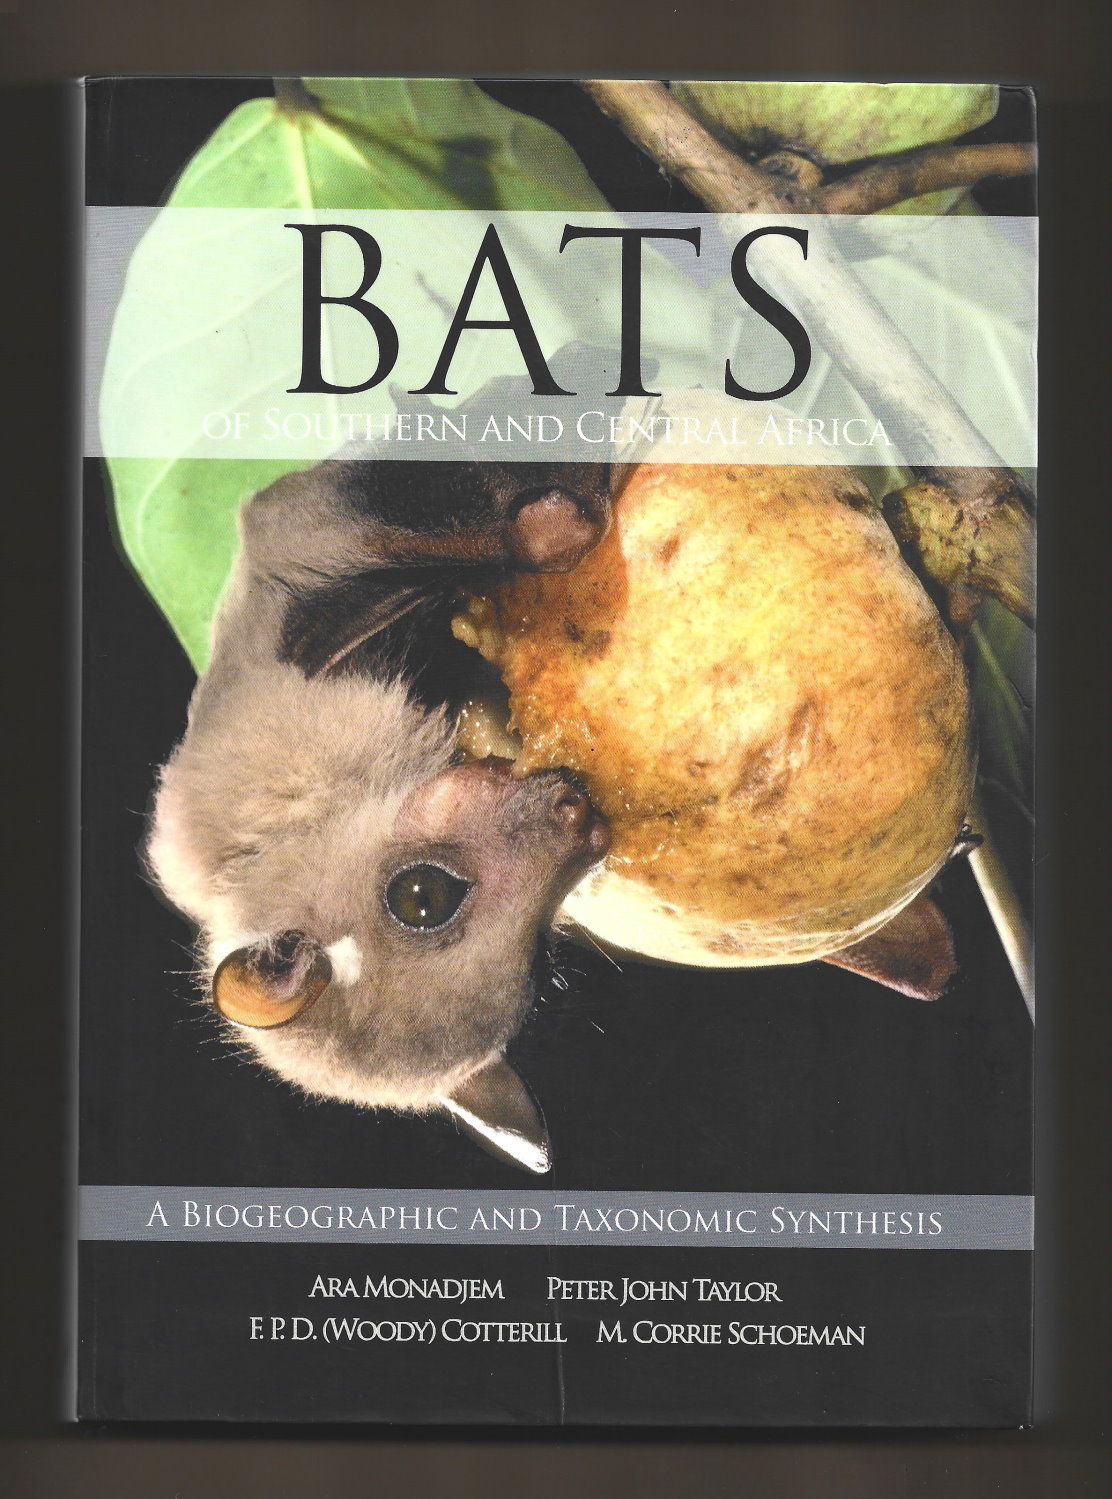 Bats of Southern and Central Africa: A Biogeographic and Taxonomic Synthesis - Ara Monadjem; Peter John Taylor; Woody Cotterill; M. Corrie Schoeman